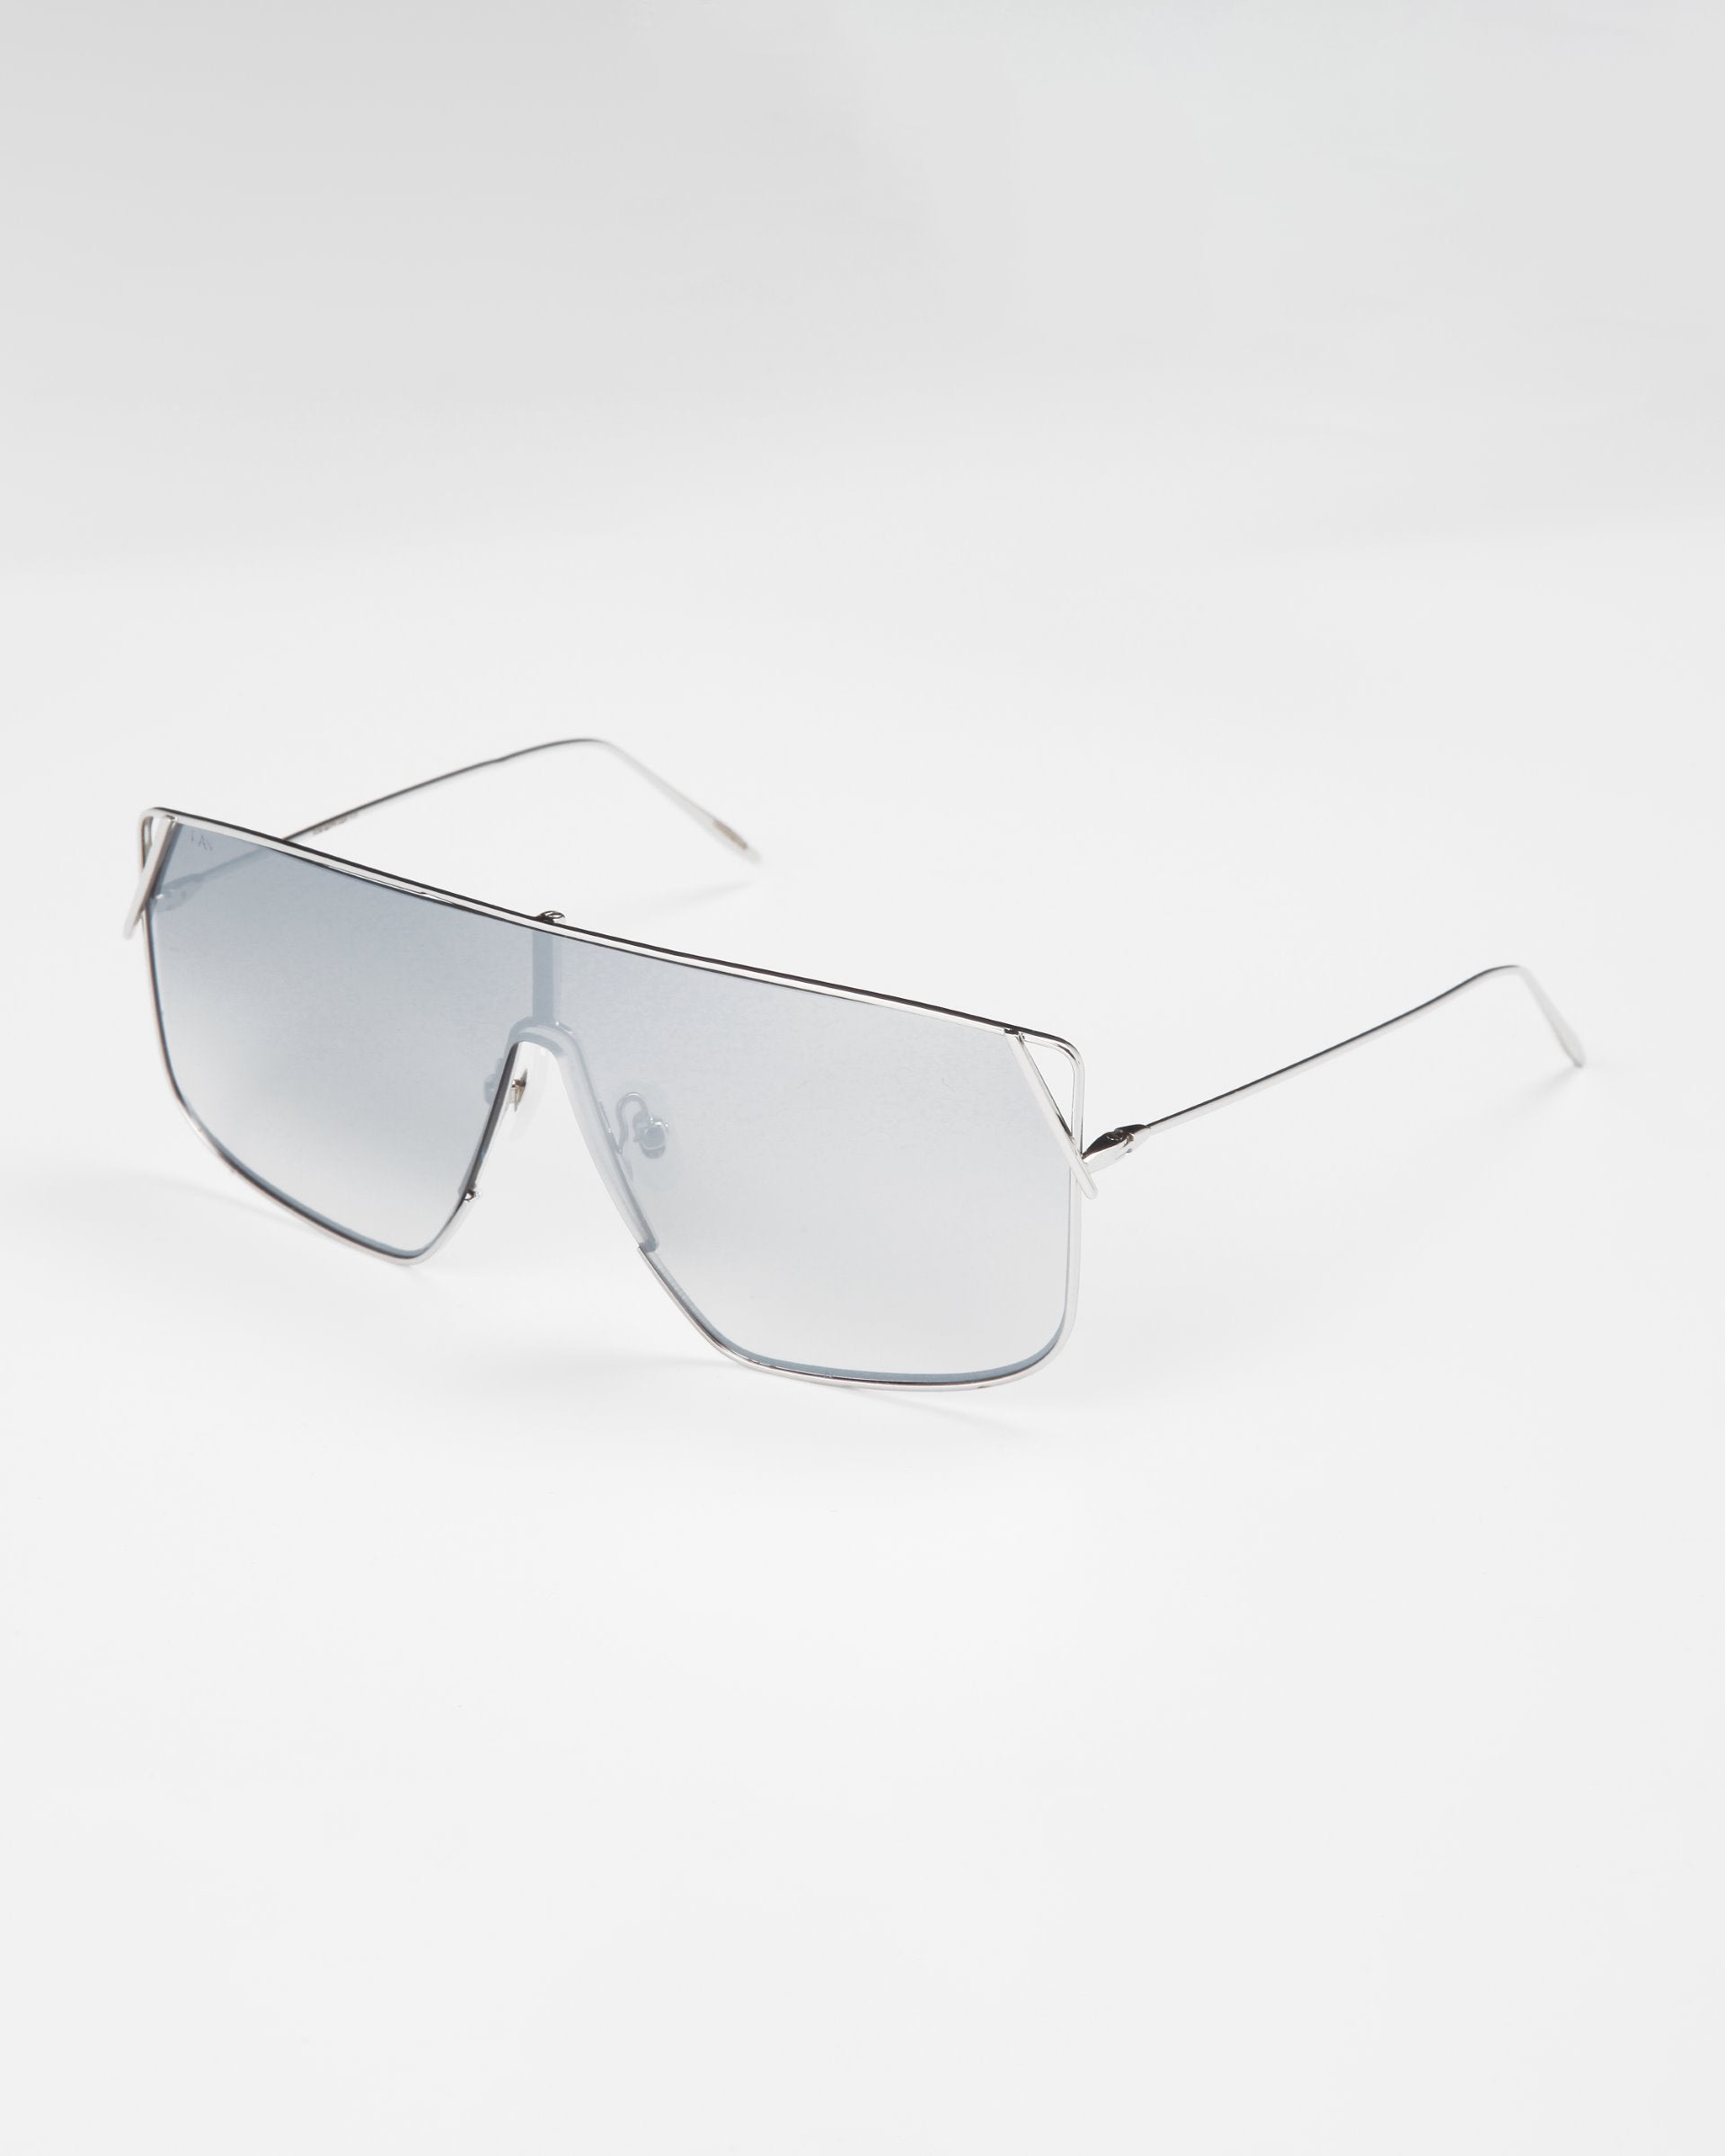 A pair of Horizon sunglasses by For Art&#39;s Sake® with silver-tinted lenses and thin stainless steel frames. The rectangular lenses feature a slight angular cut near the nose bridge, giving them a sleek and stylish appearance. Complete with adjustable nosepads and full UVA &amp; UVB protection. The background is plain white.